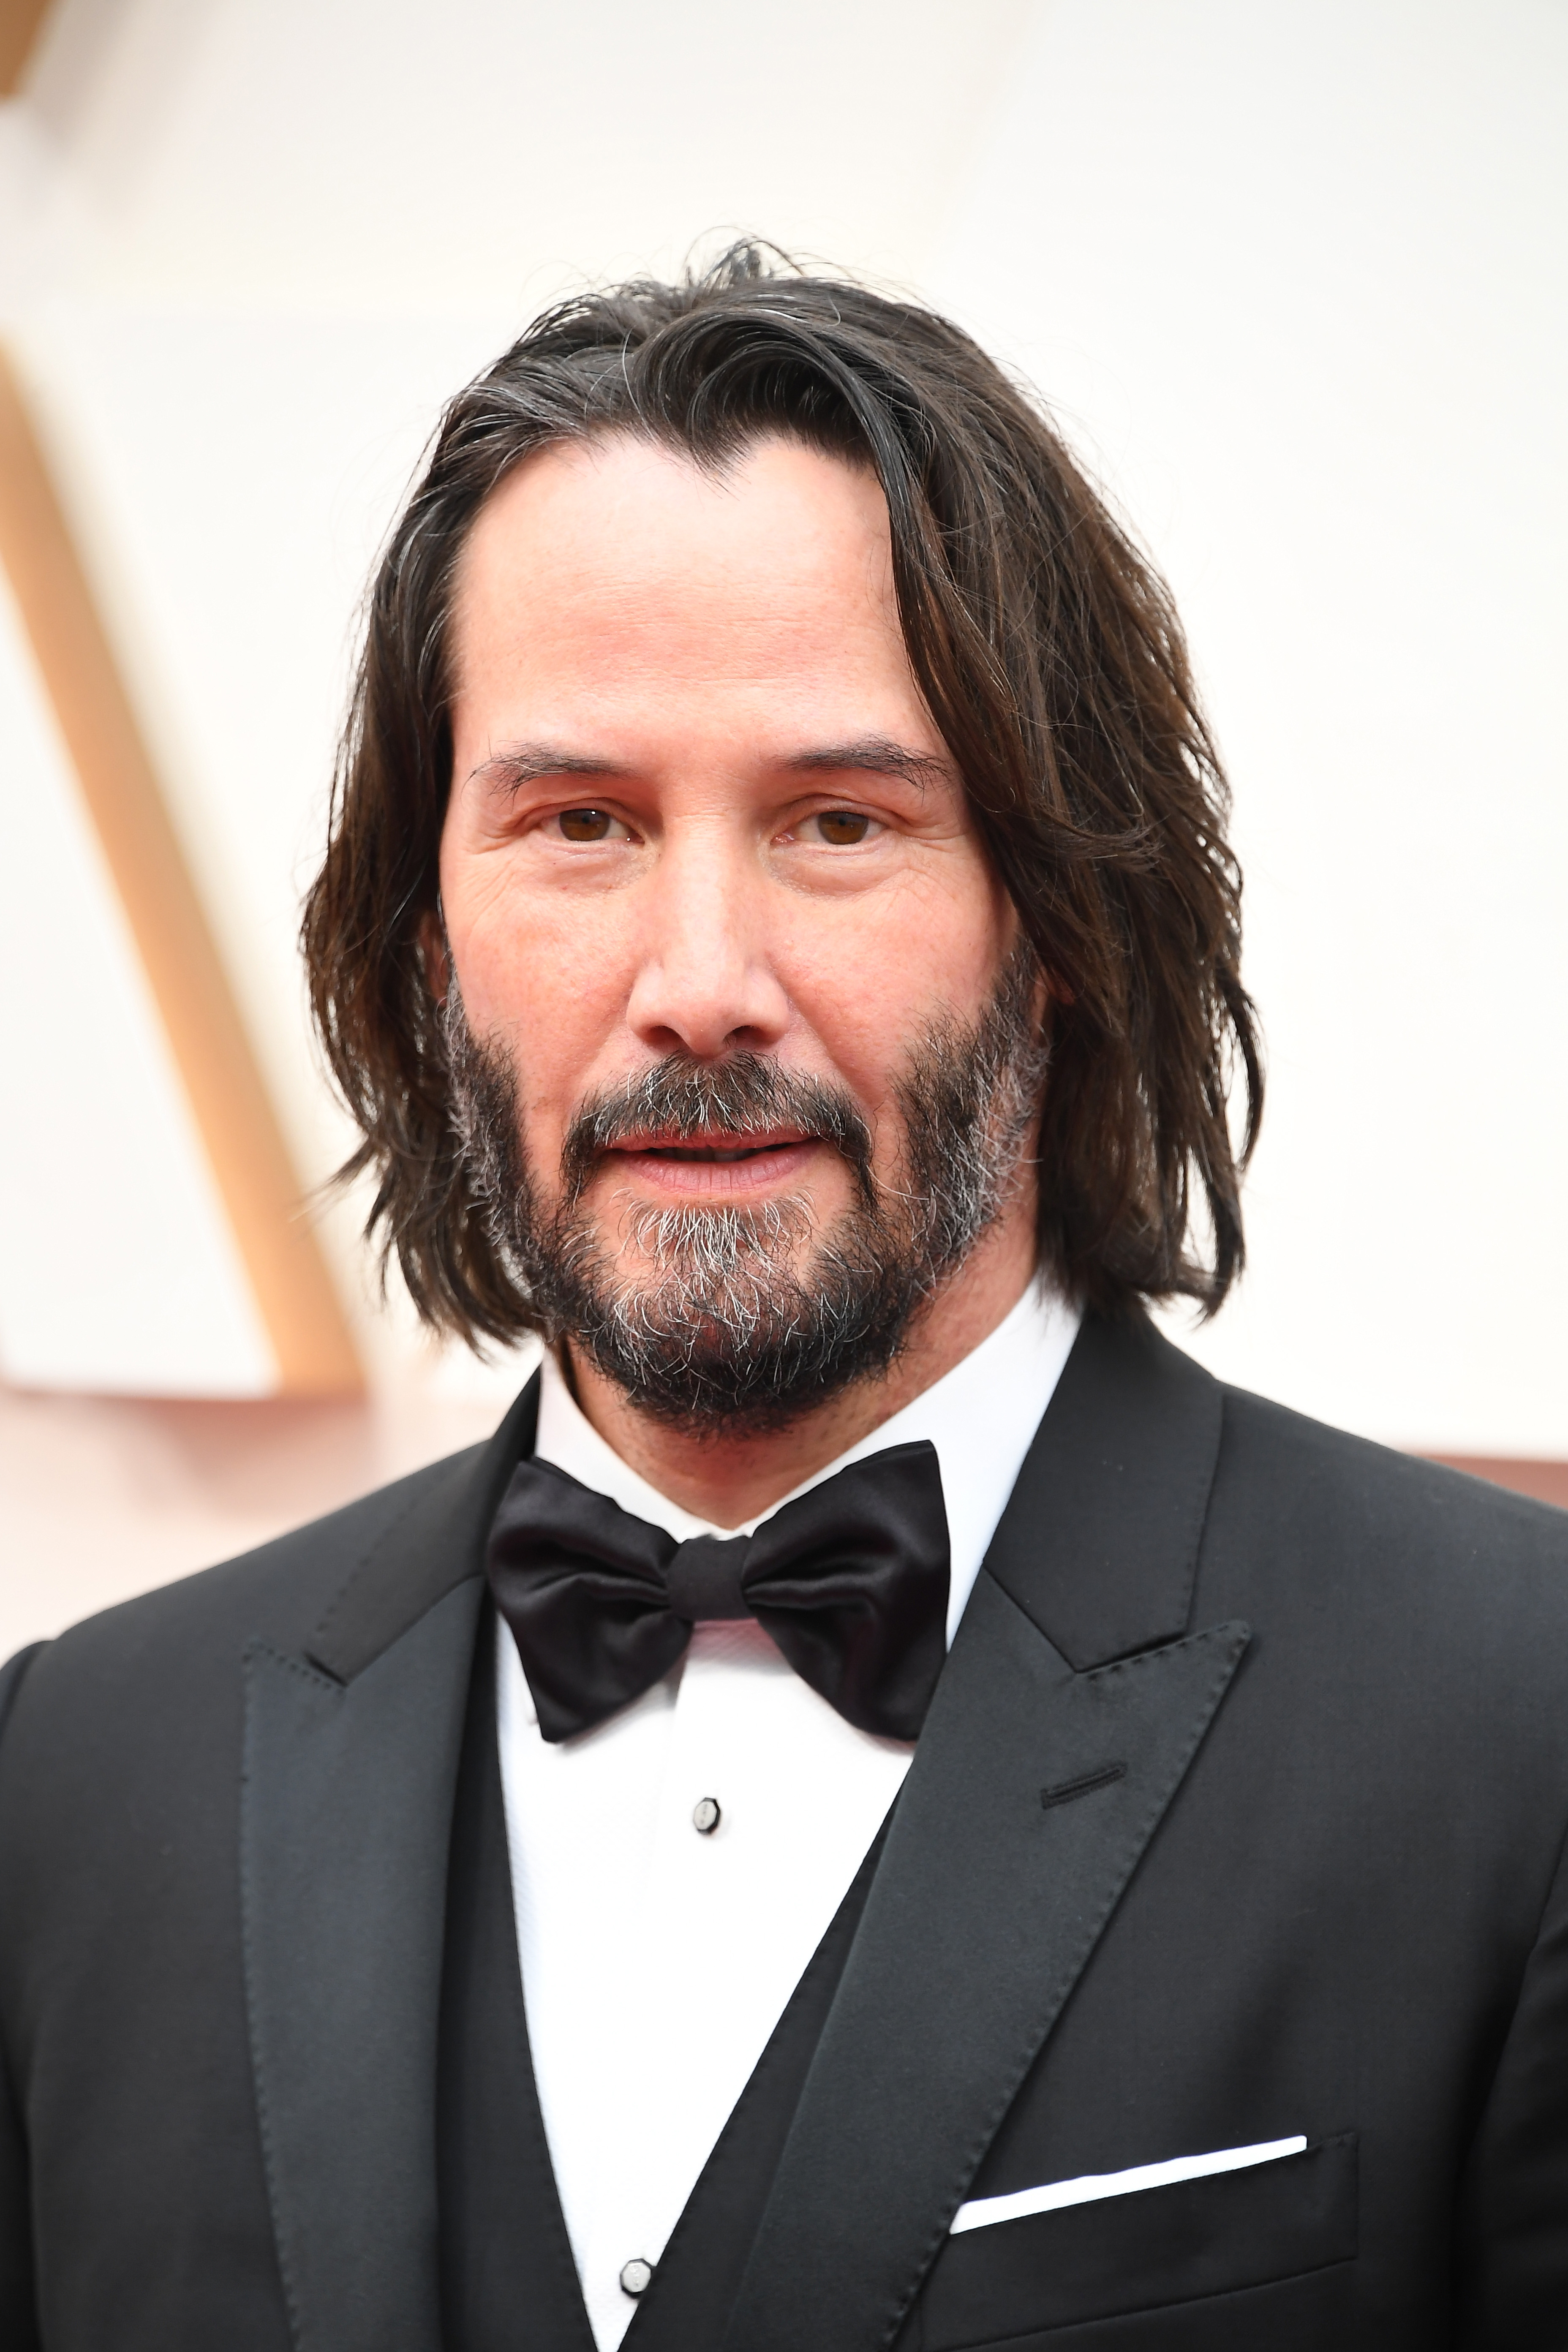 HOLLYWOOD, CALIFORNIA - FEBRUARY 09: Keanu Reeves attends the 92nd Annual Academy Awards at Hollywood and Highland on February 09, 2020 in Hollywood, California. (Photo by Steve Granitz/WireImage)